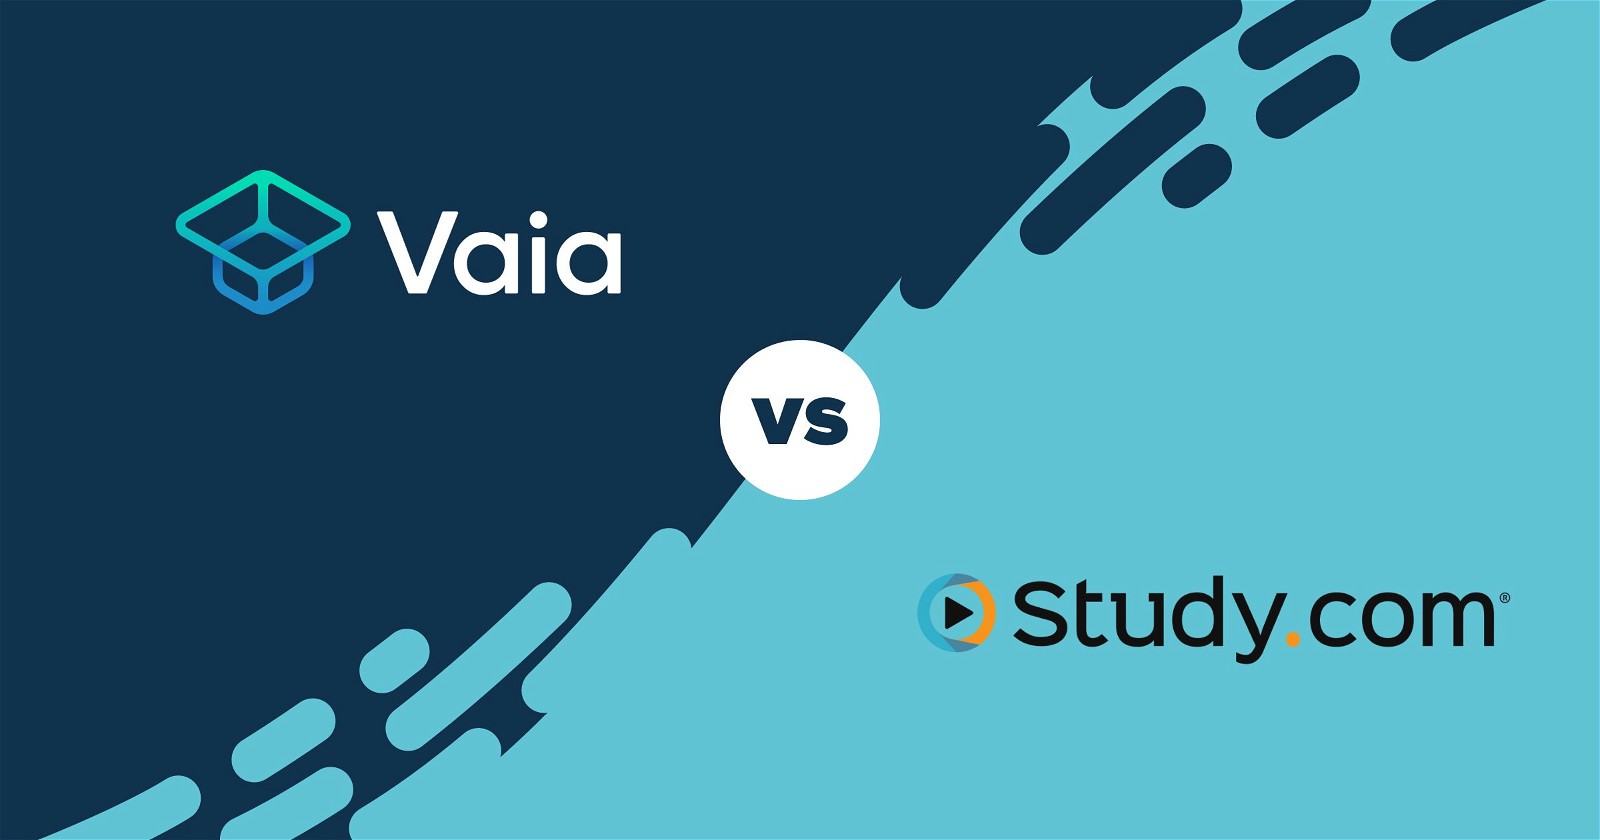 Check out our comparison of Vaia vs Study.com as the number one free learning app today, Vaia Magazine